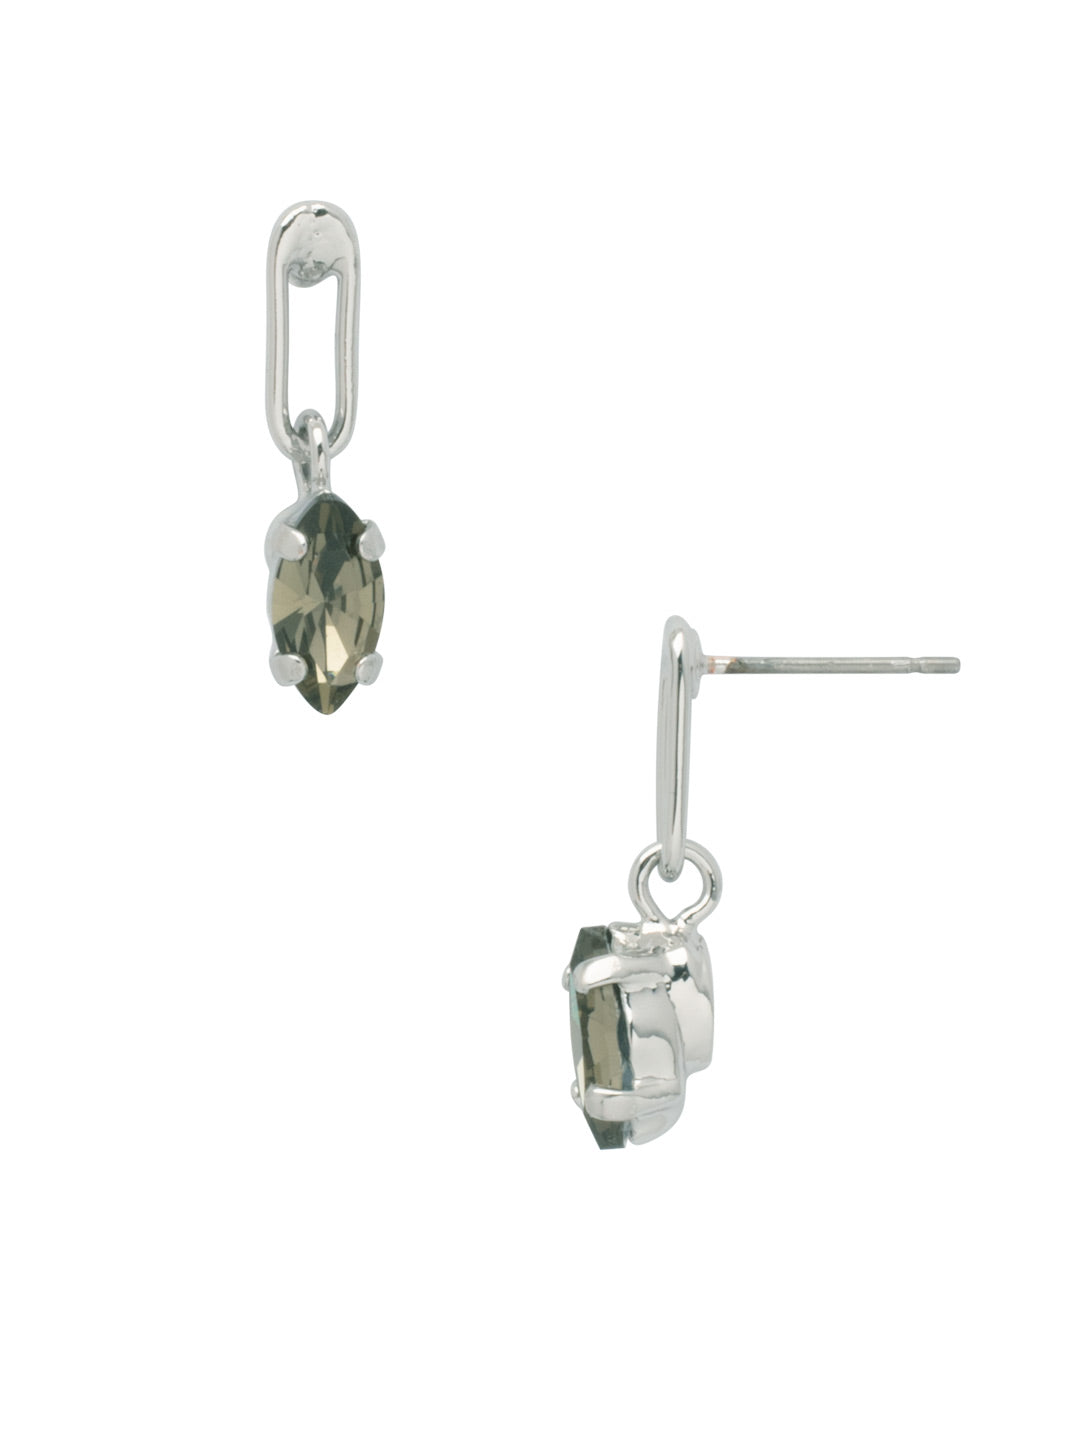 Clarissa Chain Link Dangle Earrings - EFL66PDASP - <p>The Clarissa Chain Link Dangle Earrings feature a navette cut crystal dangling from a single chain link on a post. From Sorrelli's Aspen SKY collection in our Palladium finish.</p>